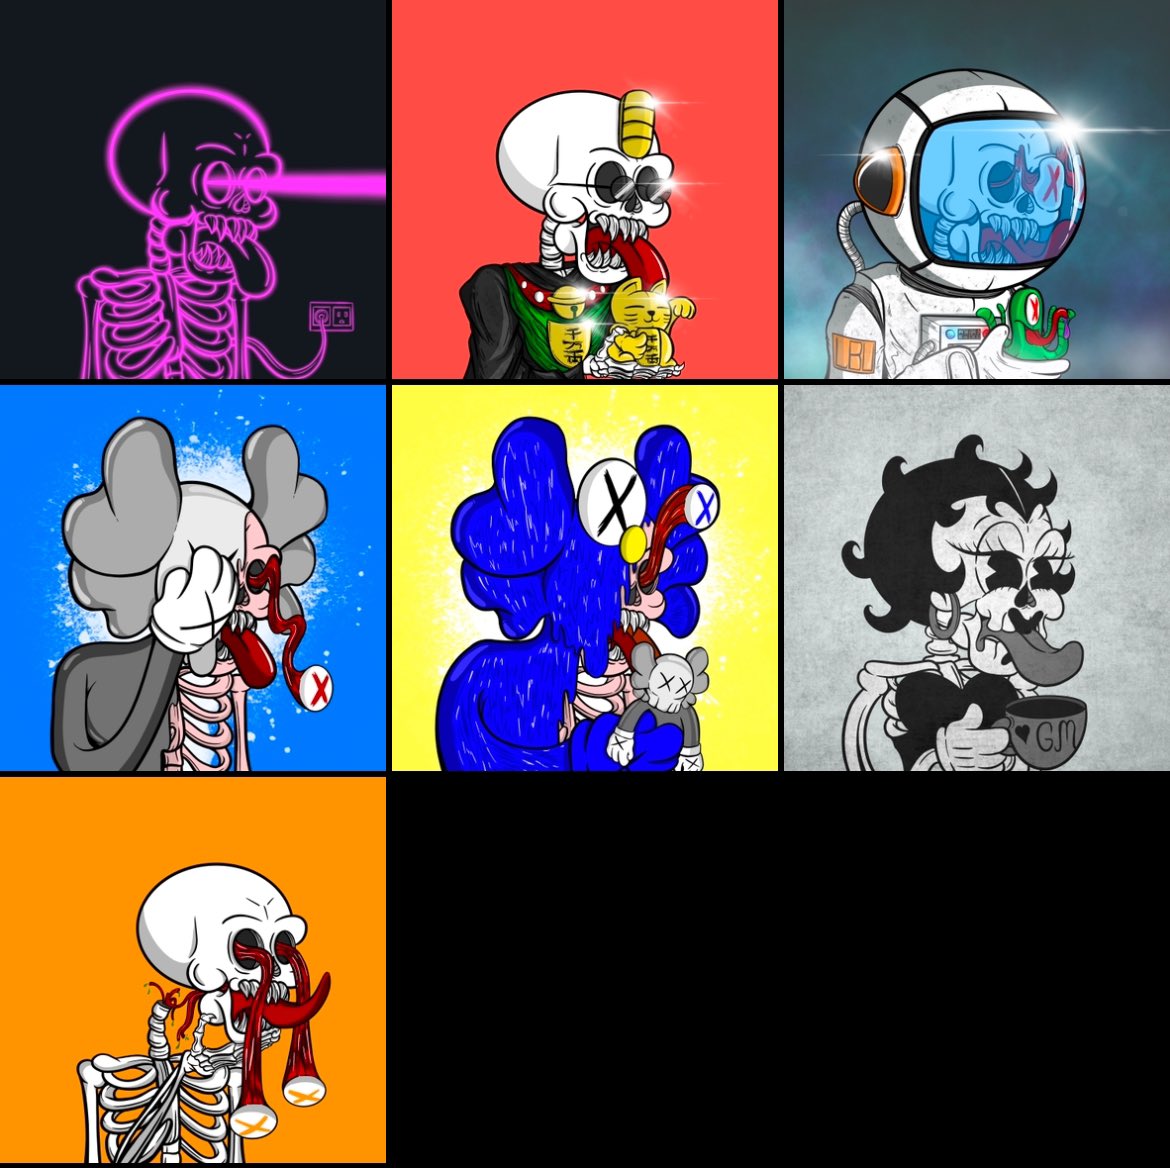 We’ve been in the LAB. 5 new Laughing Bones available now on OpenSea ! Get them while they’re hot !!  @SenziDI000 

opensea.io/collection/lau…

#opensea #nftcollector #nftproject #nftdesign #nftcommunity #nftart #polygoncommunity #matic #eth #nftshill